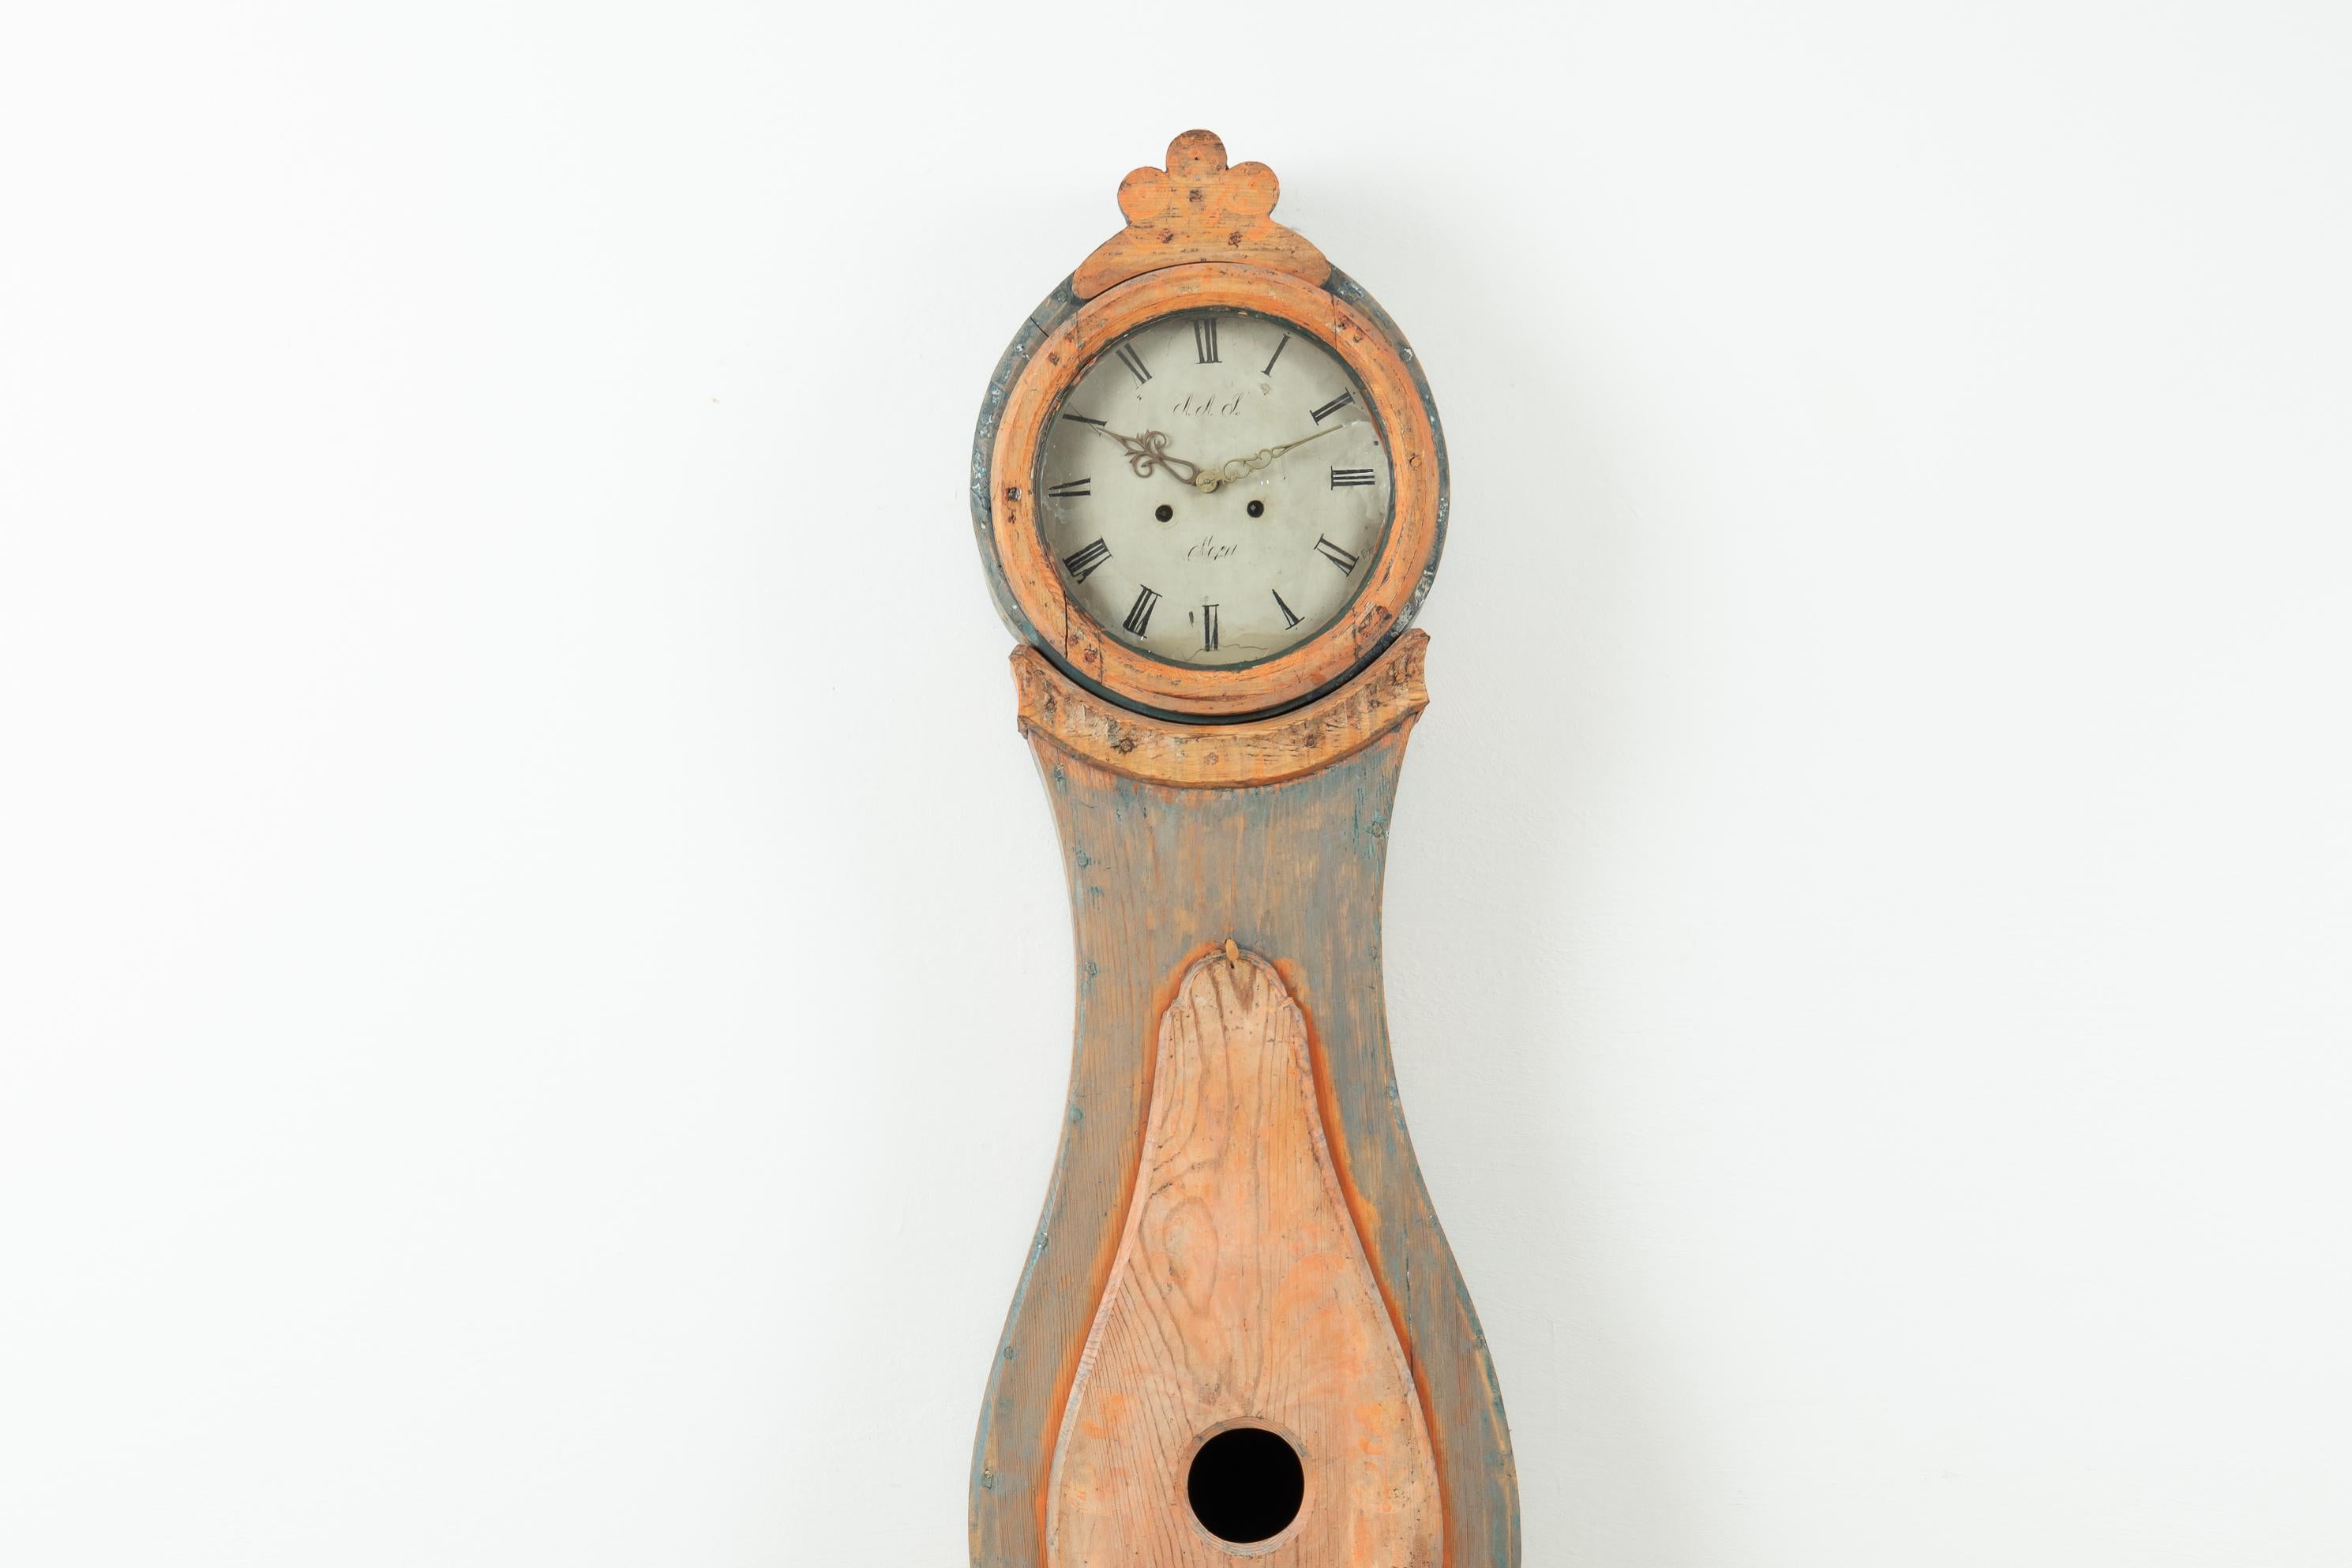 Long case clock form Nusnäs. This type of clock is often referred to as a Nusnäs clock after the municipality Nusnäs in the Swedish province Dalarna where they were made. The clocks are characterised by their smooth front and Rococo influenced